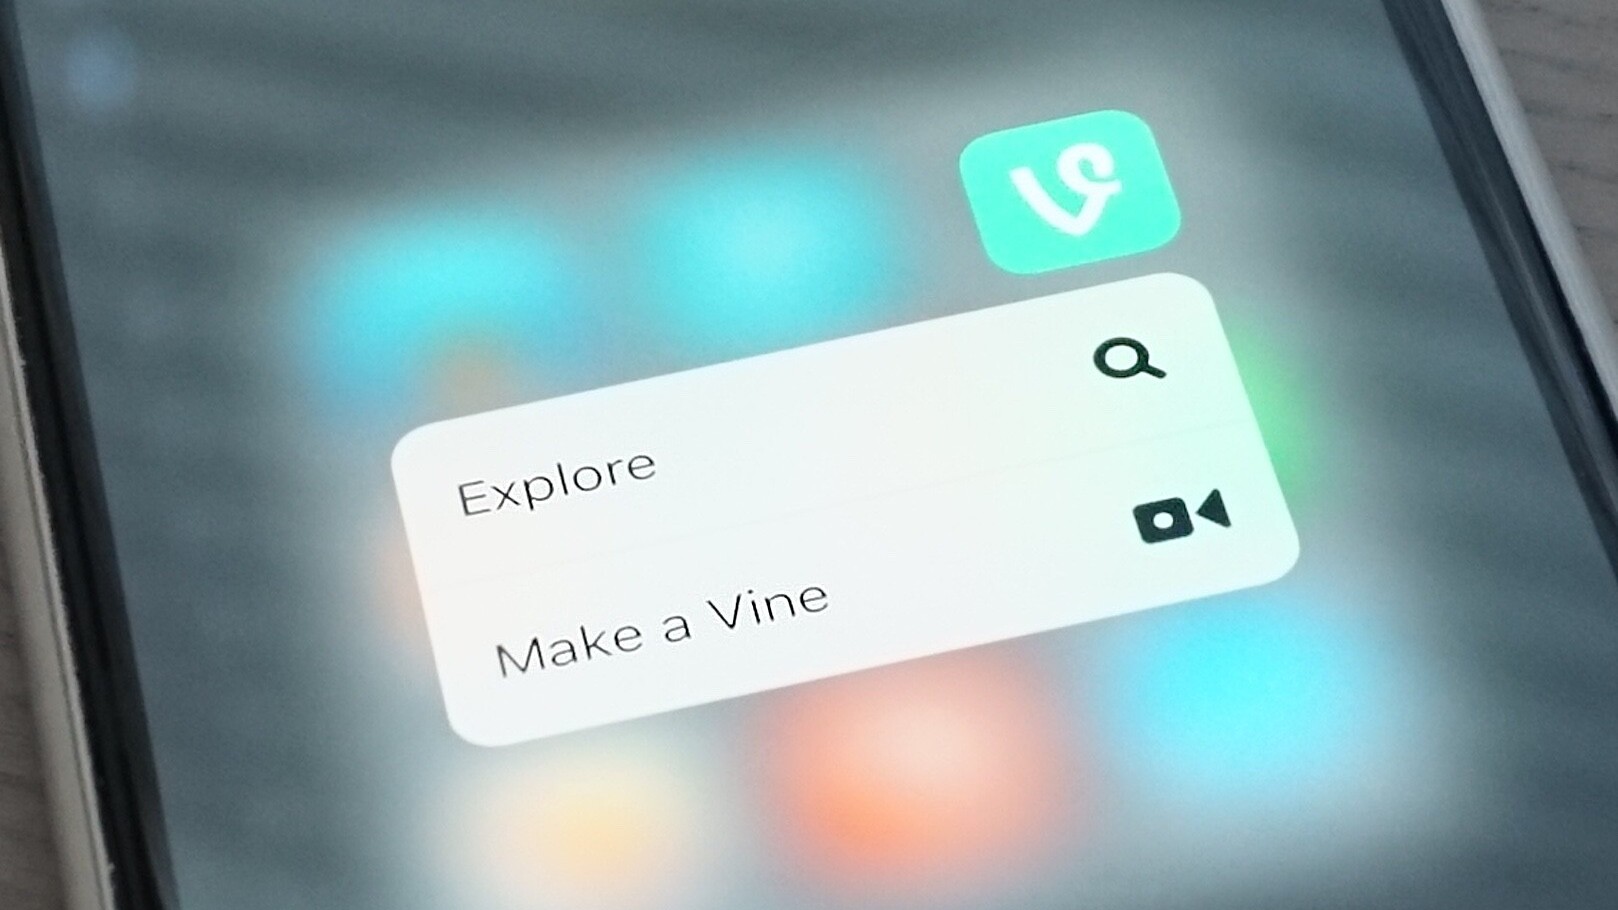 Good news: Vine will survive, but it wont be the same